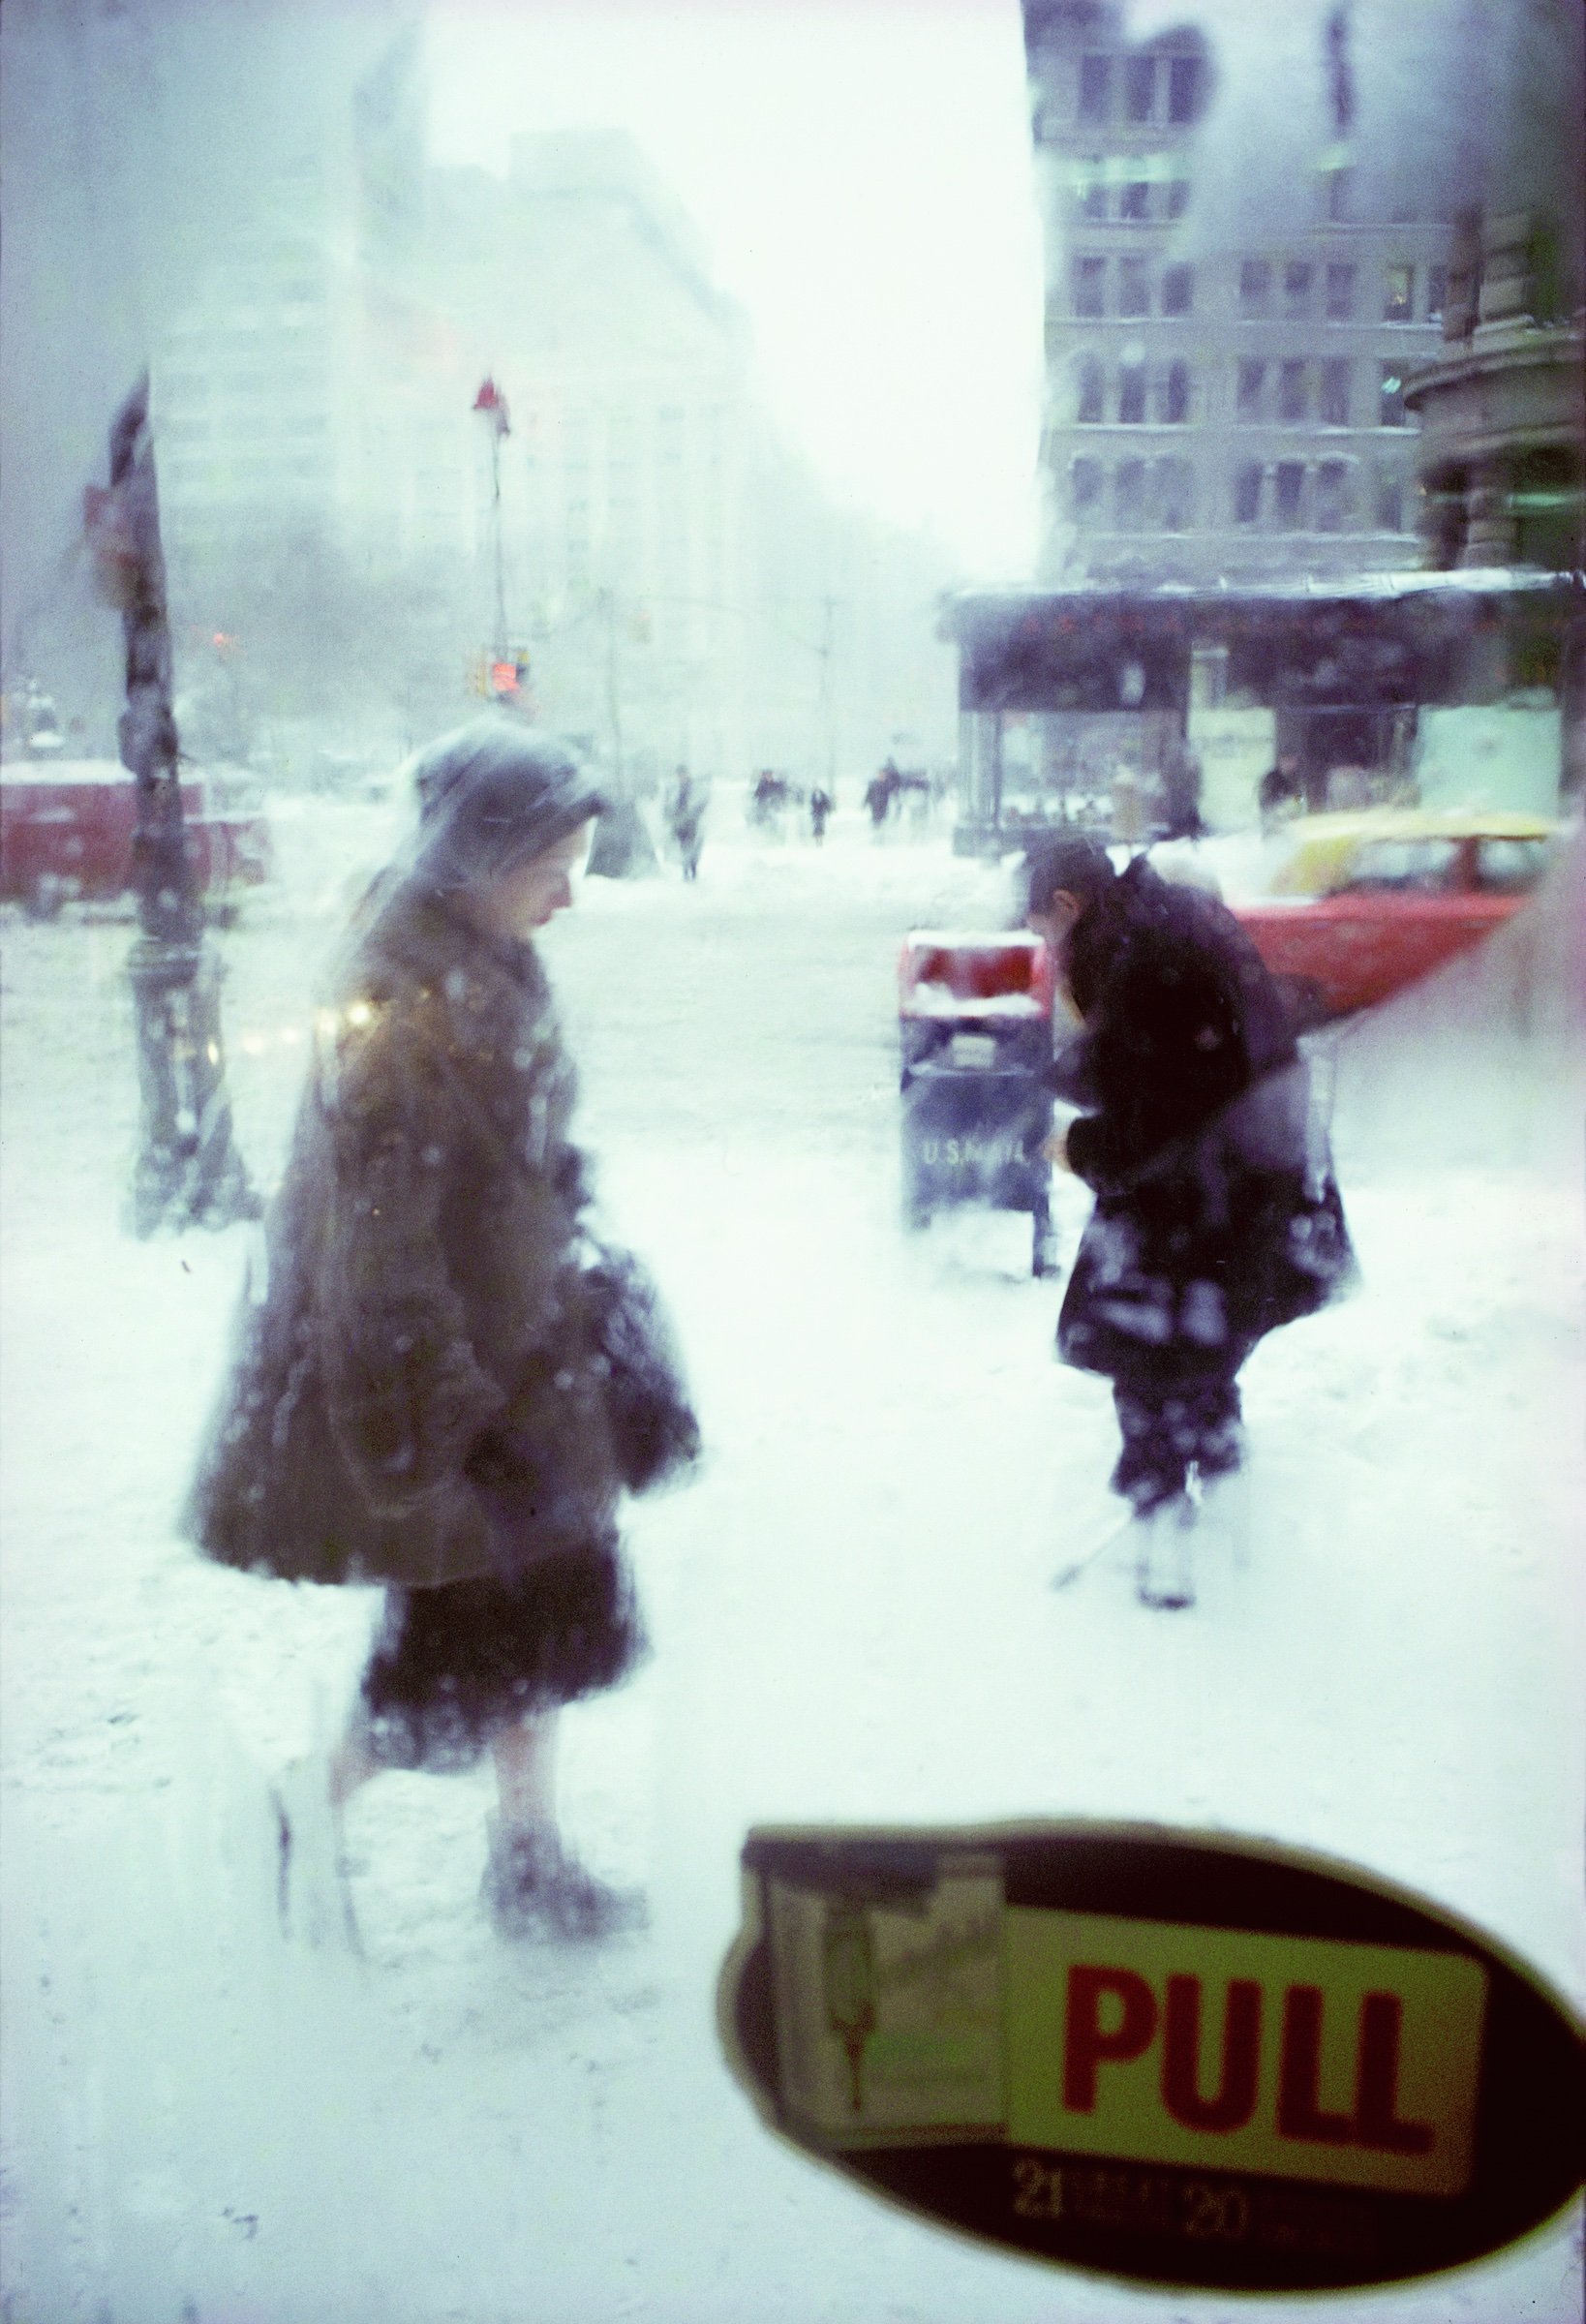 Saul Leiter: An Unfinished World Top Image